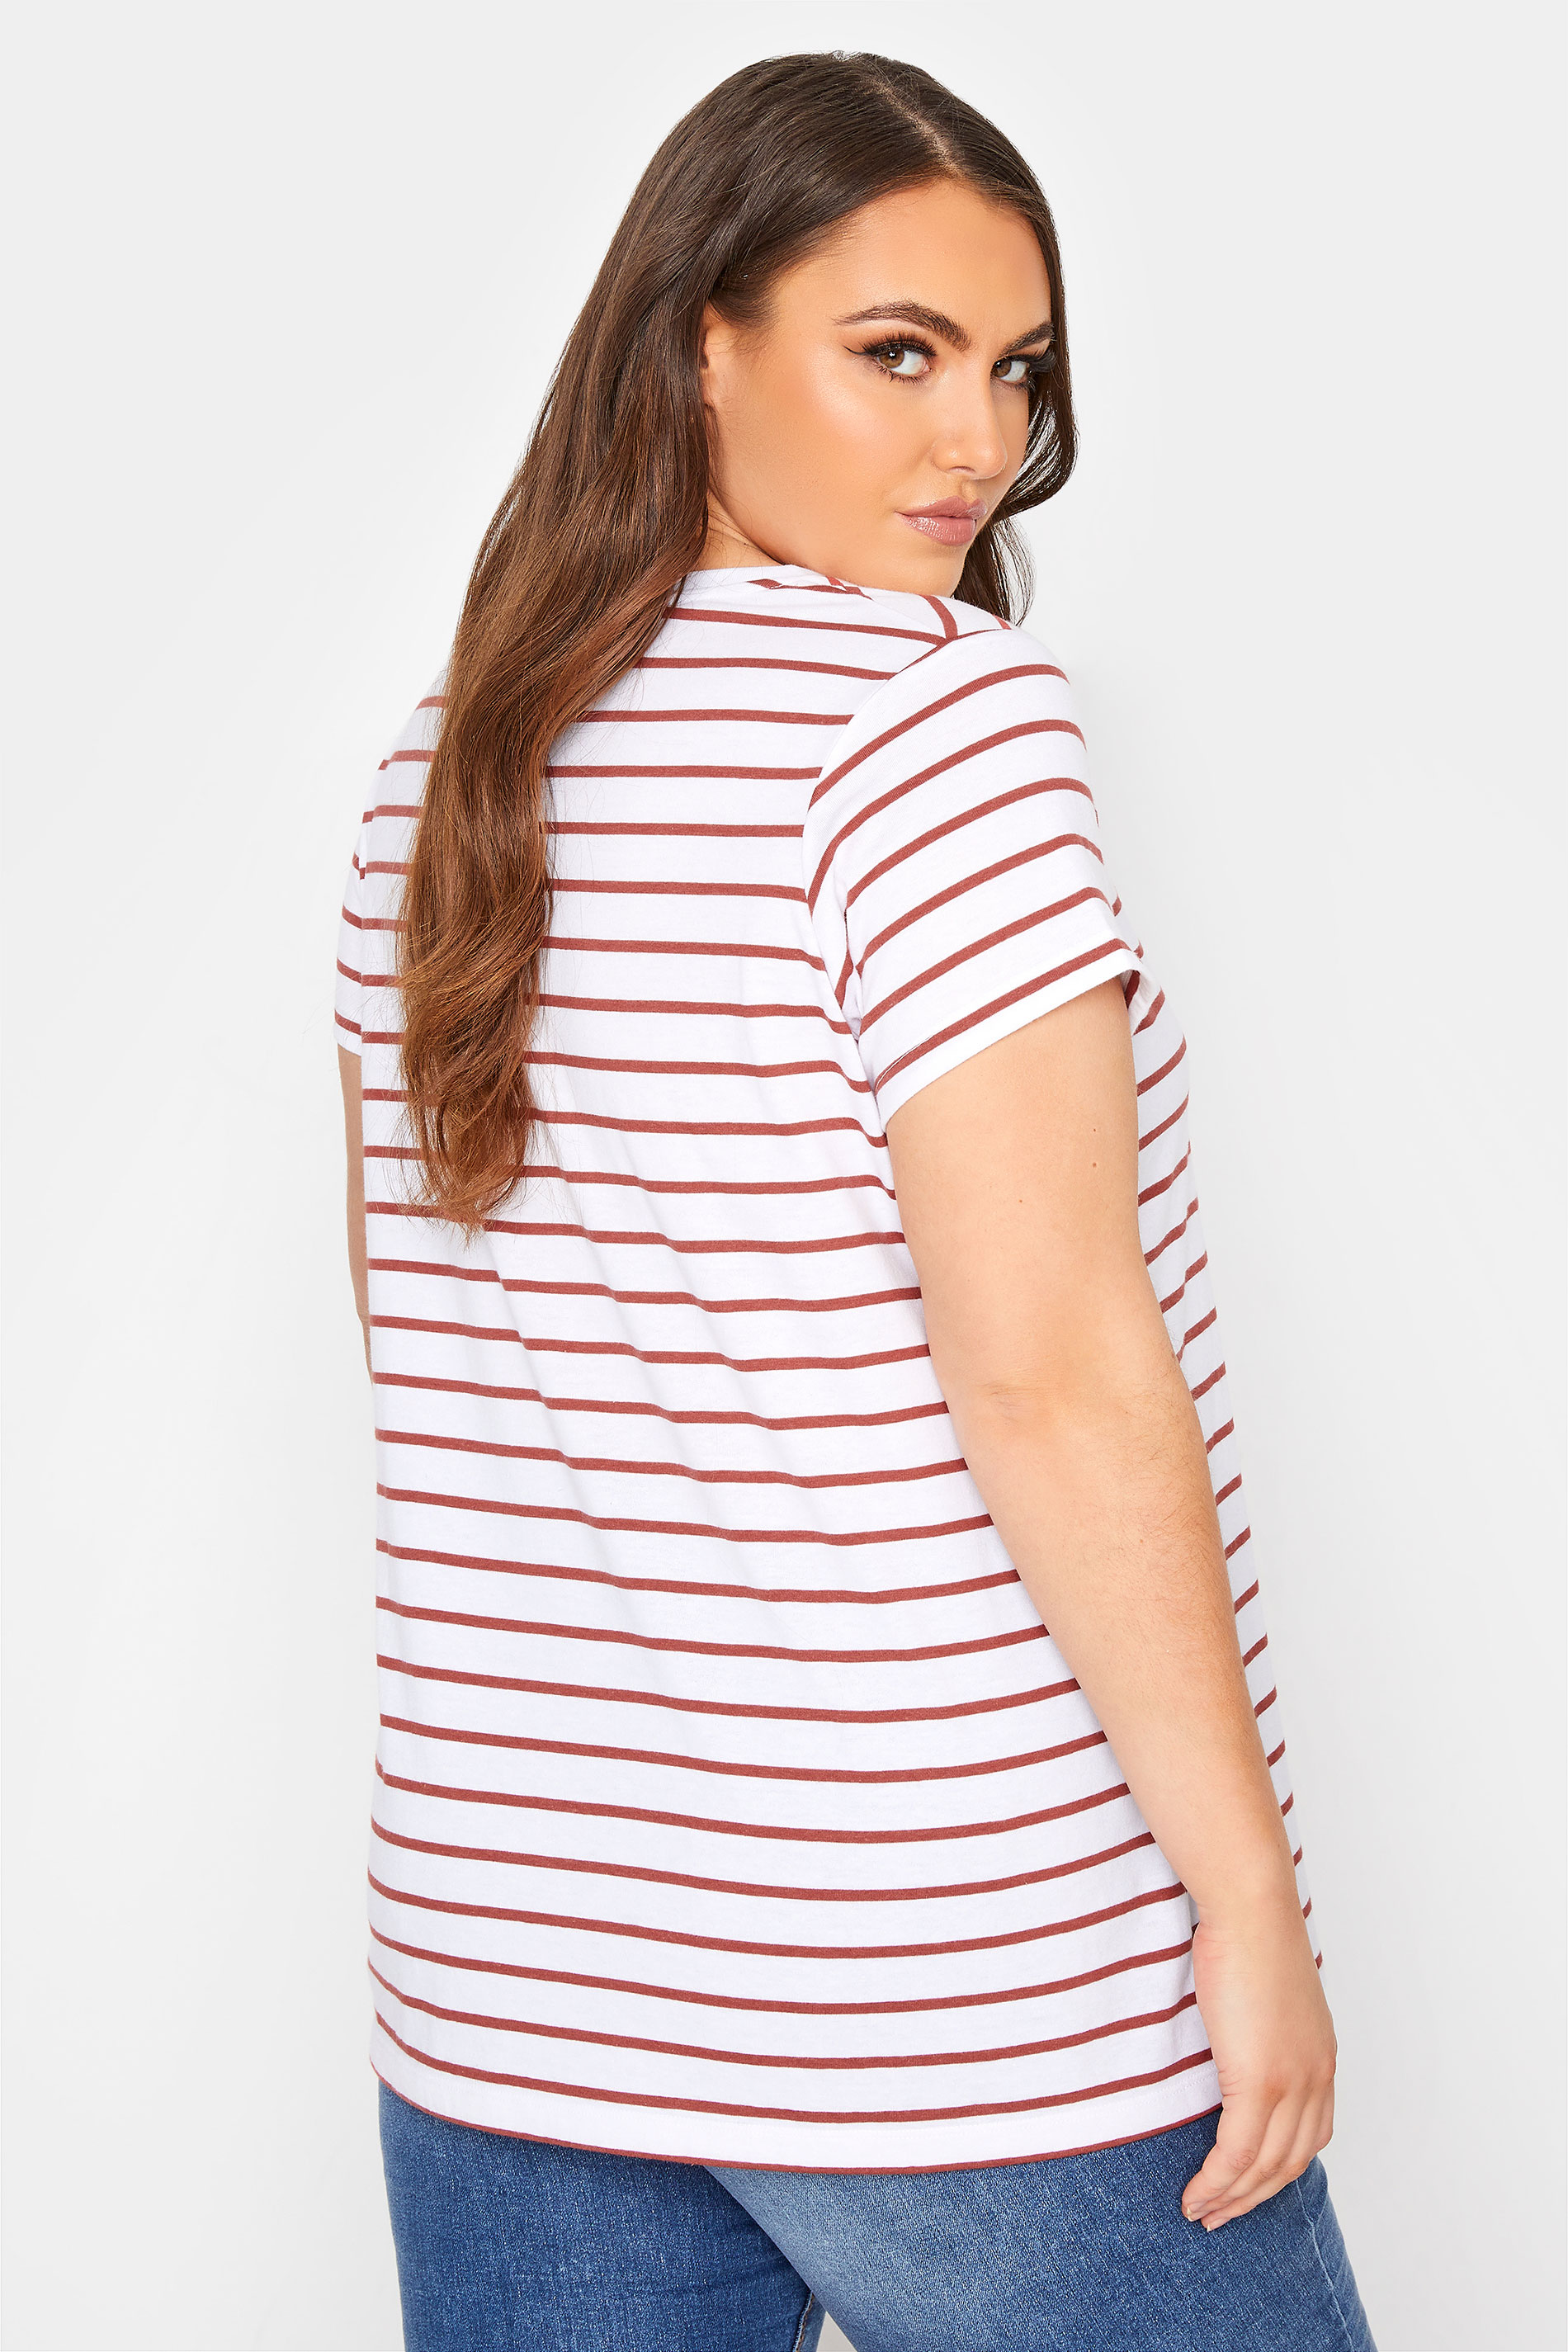 Grande taille  Tops Grande taille  T-Shirts | T-Shirt Blanc & Rouge Fines Rayures - PX16063